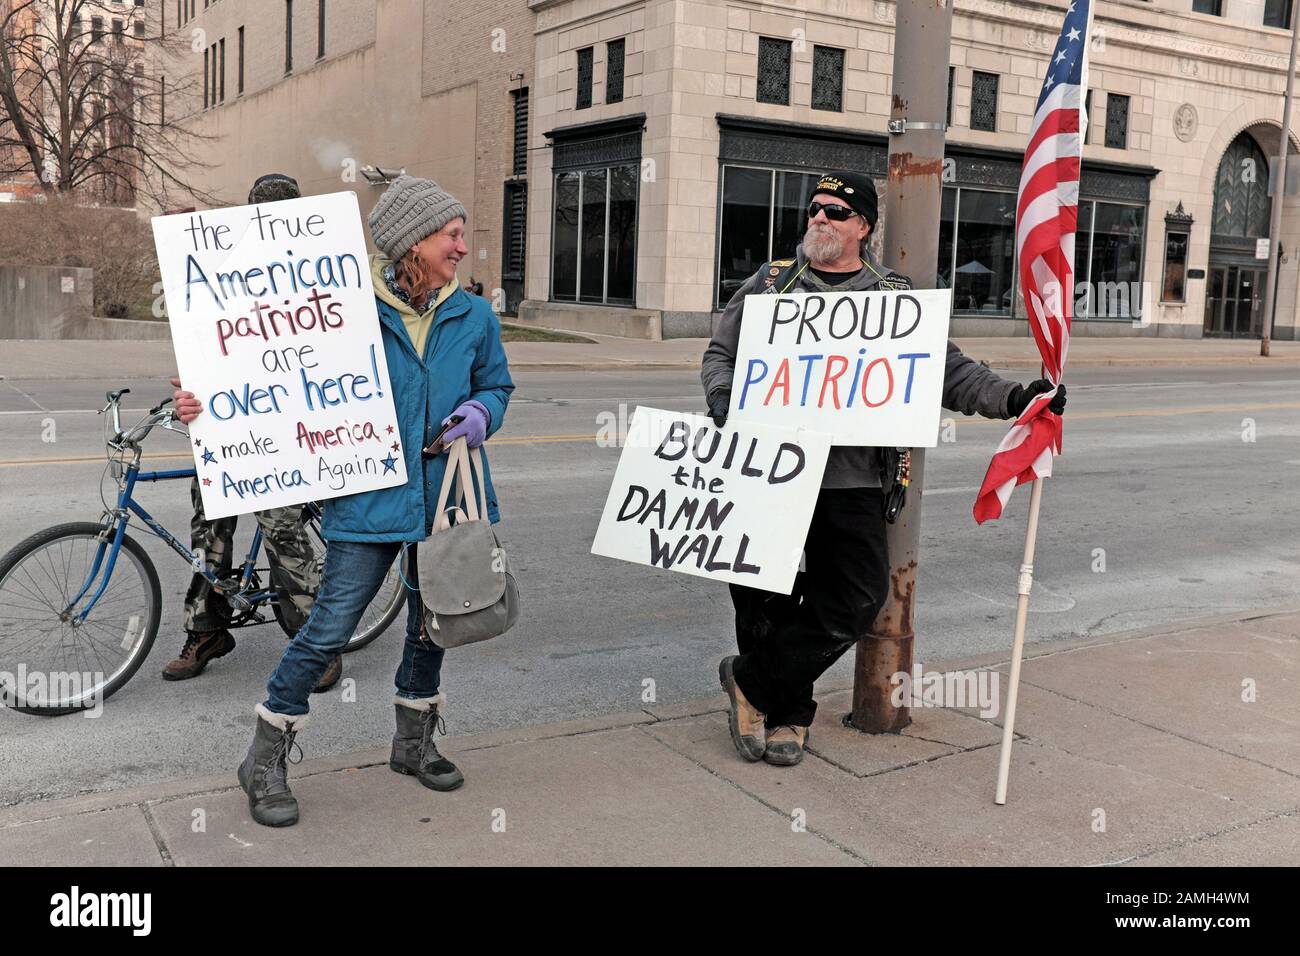 US patriots from both political sides stand side by side with the US flag on a street in Toledo, Ohio during the 2020 Trump re-election campaign visit. Stock Photo